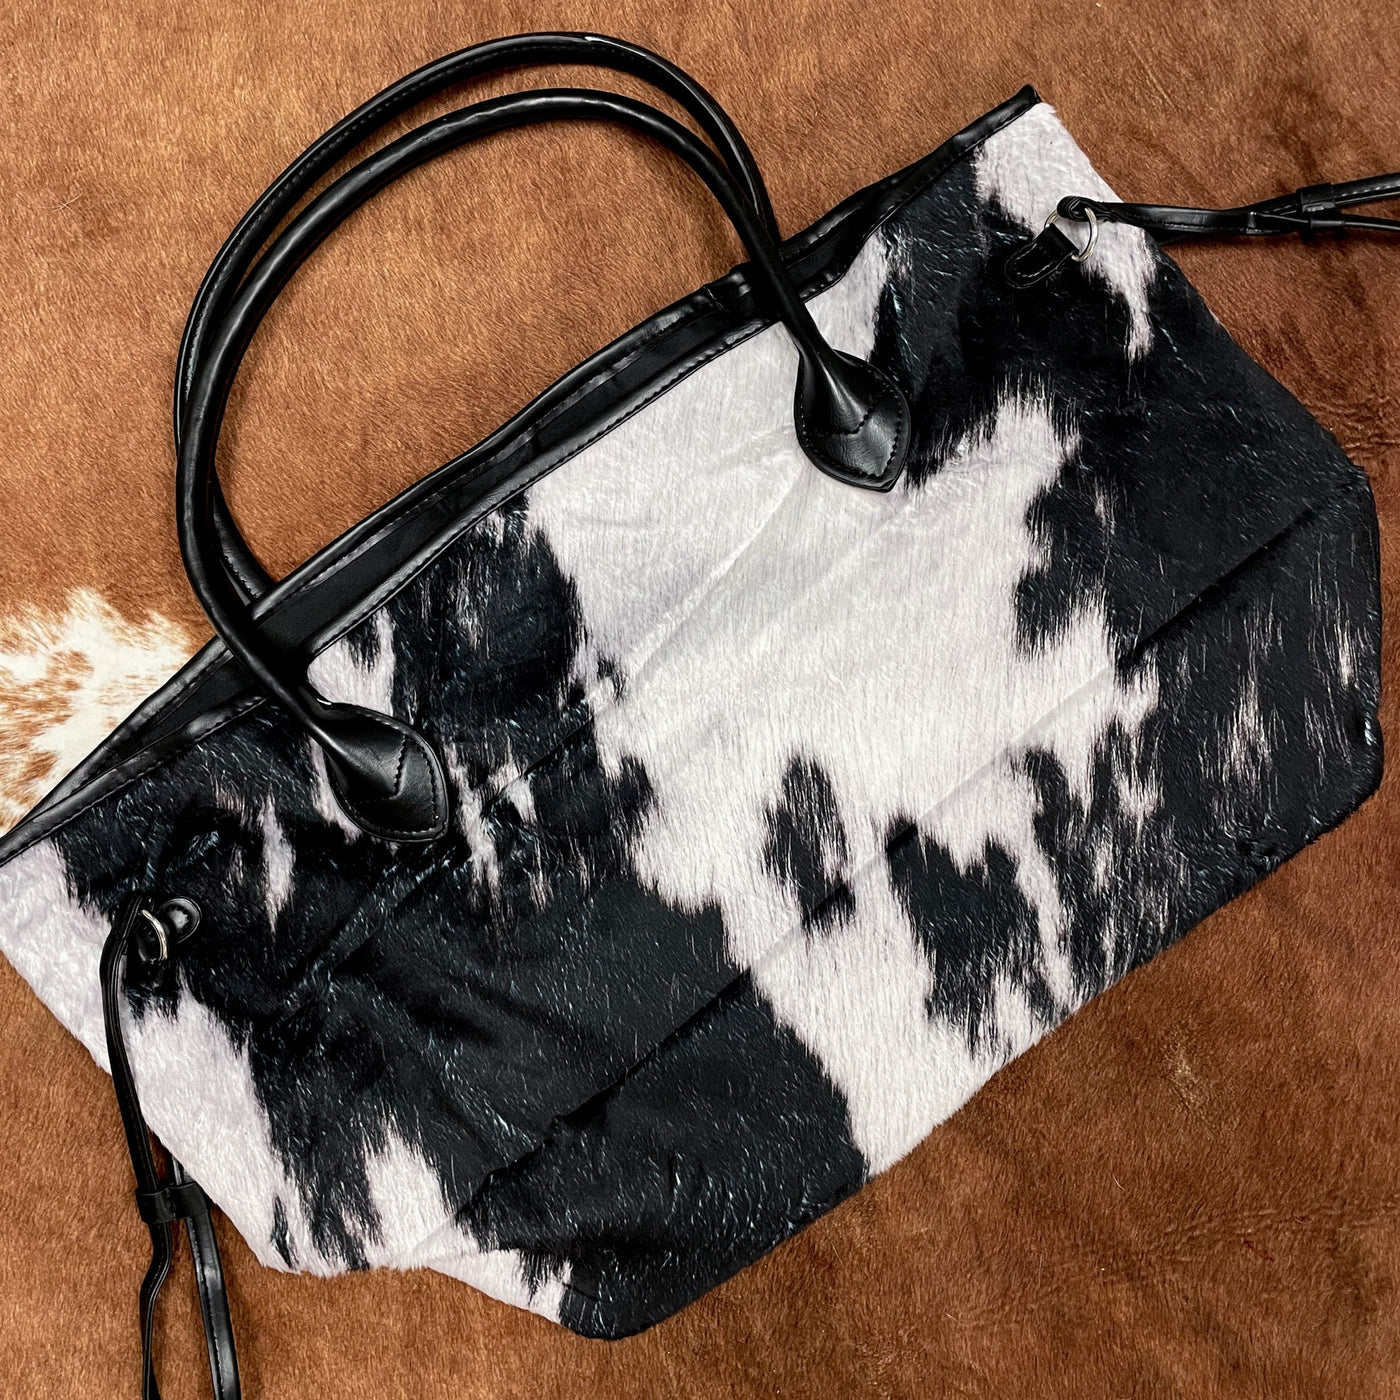 Weekender tote bag a super soft, faux cowhide print - the perfect western-inspired gift for the traveler in your life! Choose from black or brown cow print.